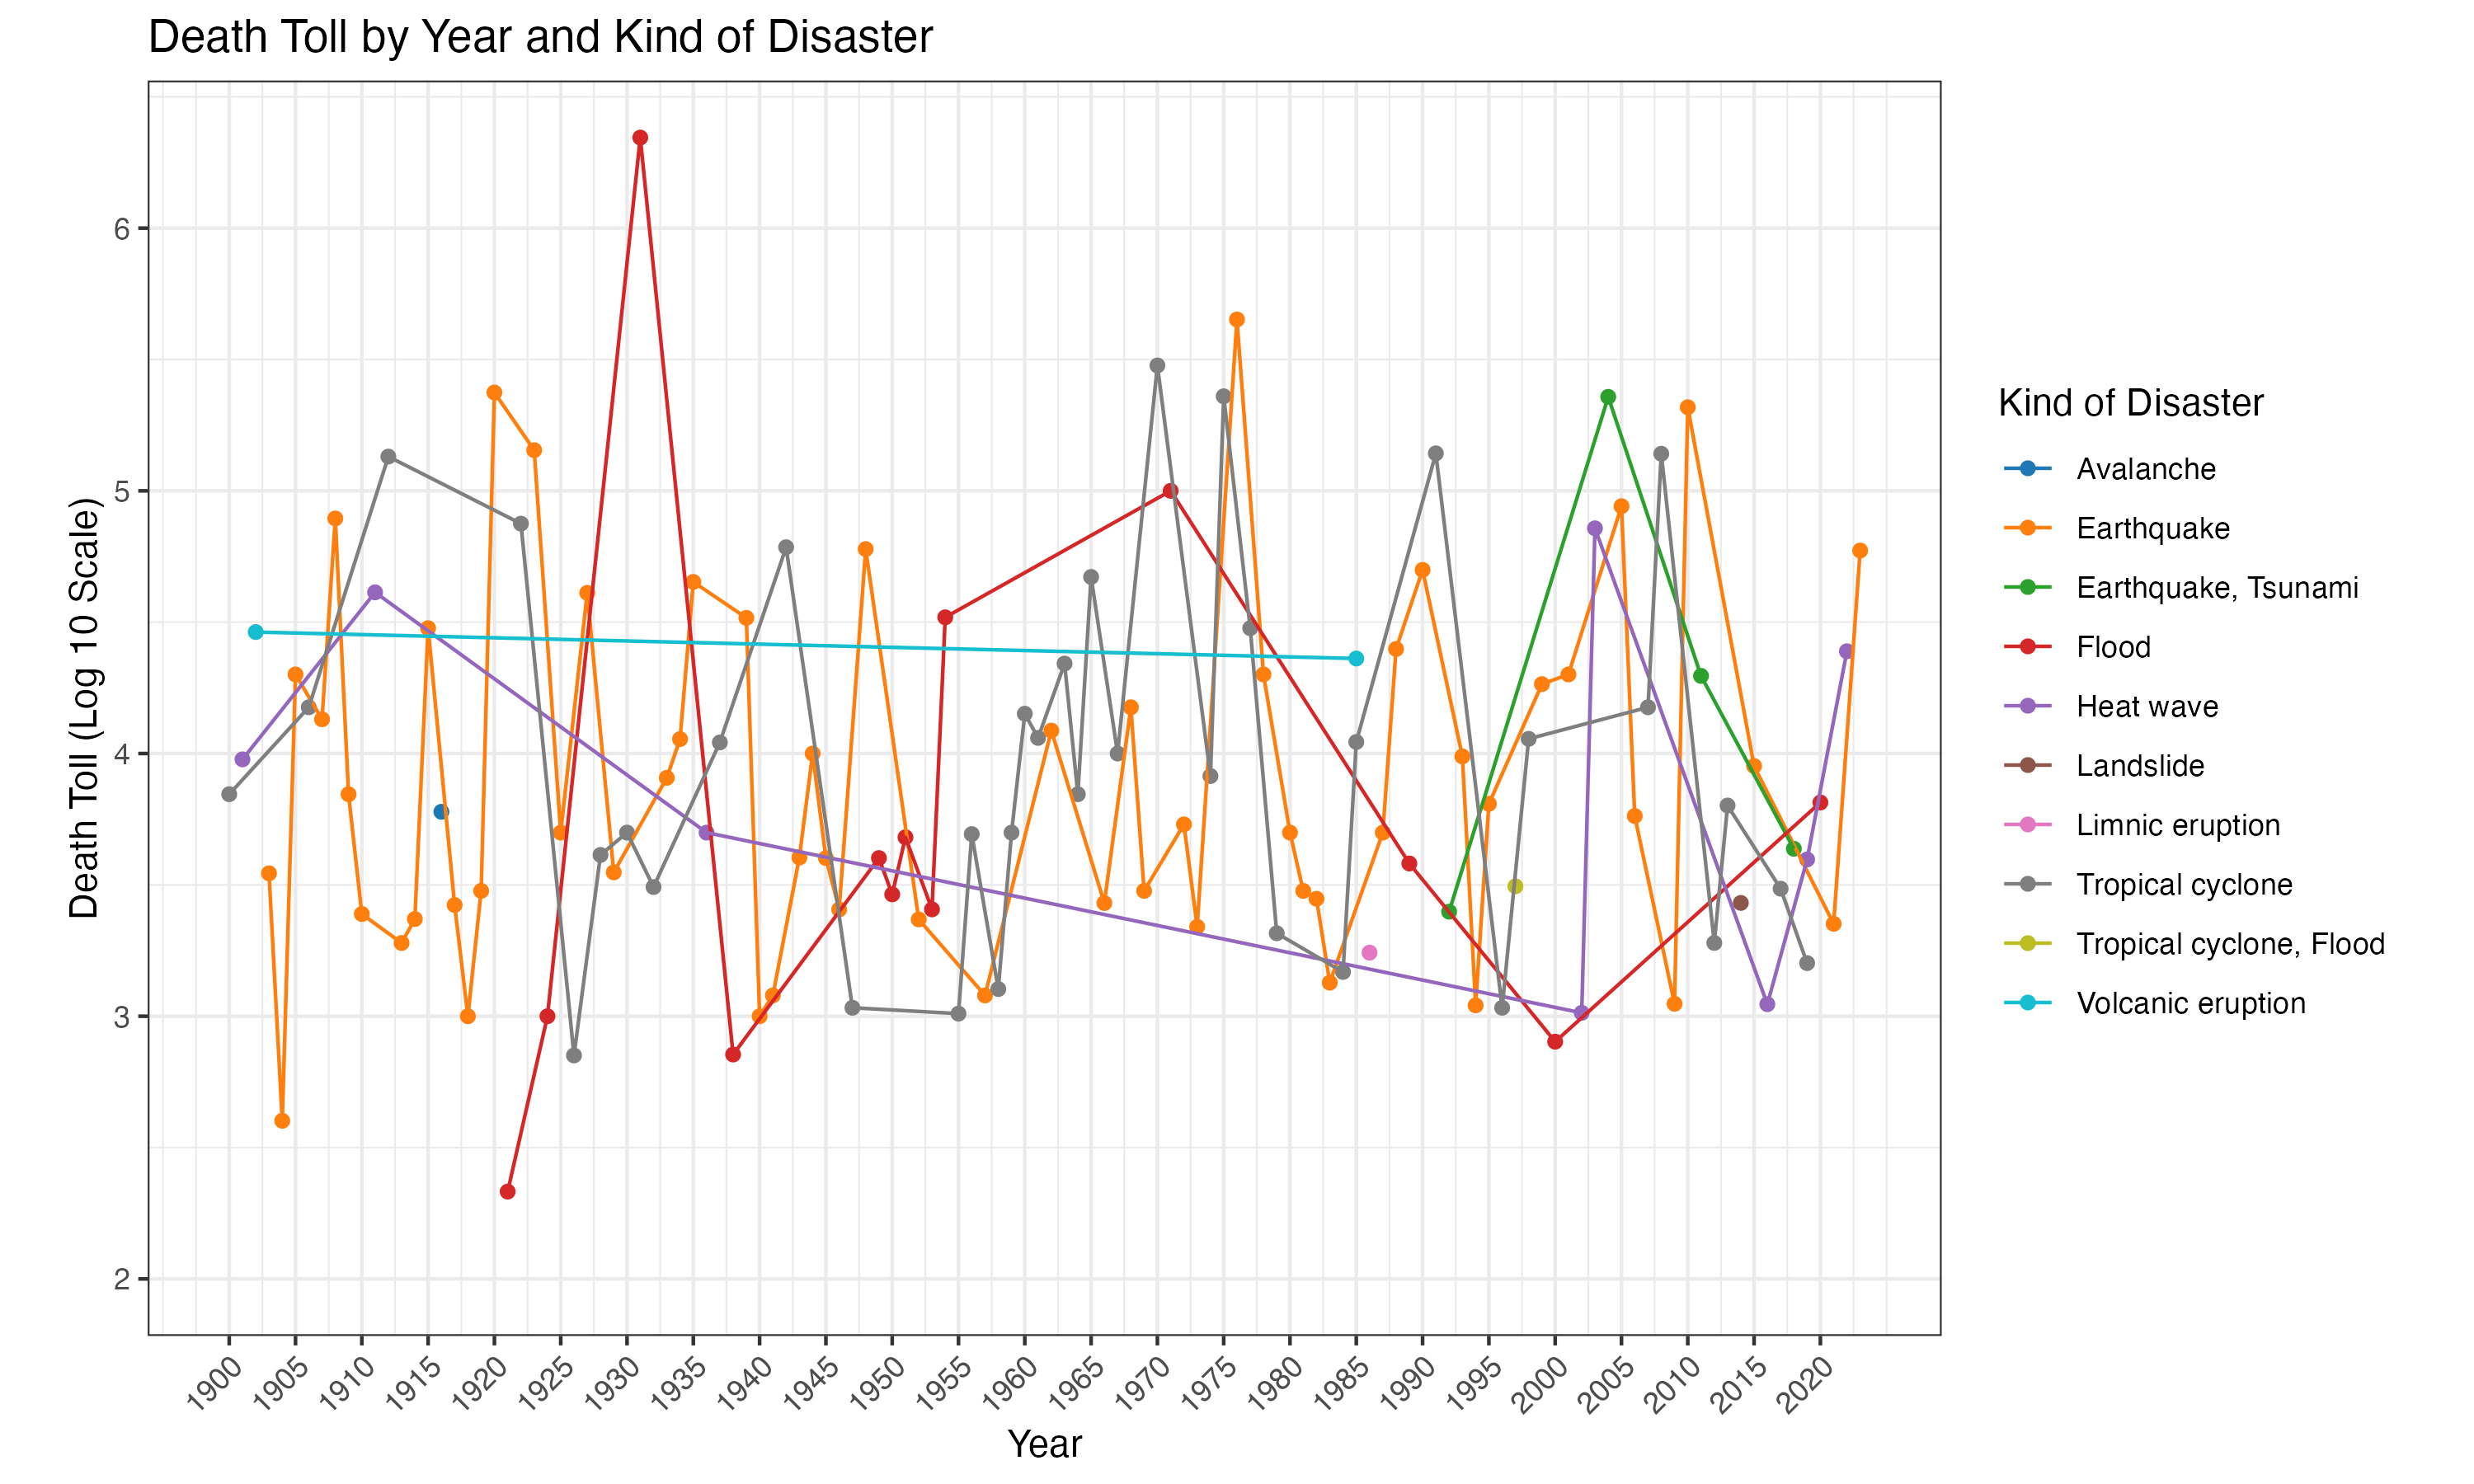 Plot. Death Toll in Log Scale of Major Natural Disasters in the 20th and 21st Centuries, Grouped by Year and Disaster Type